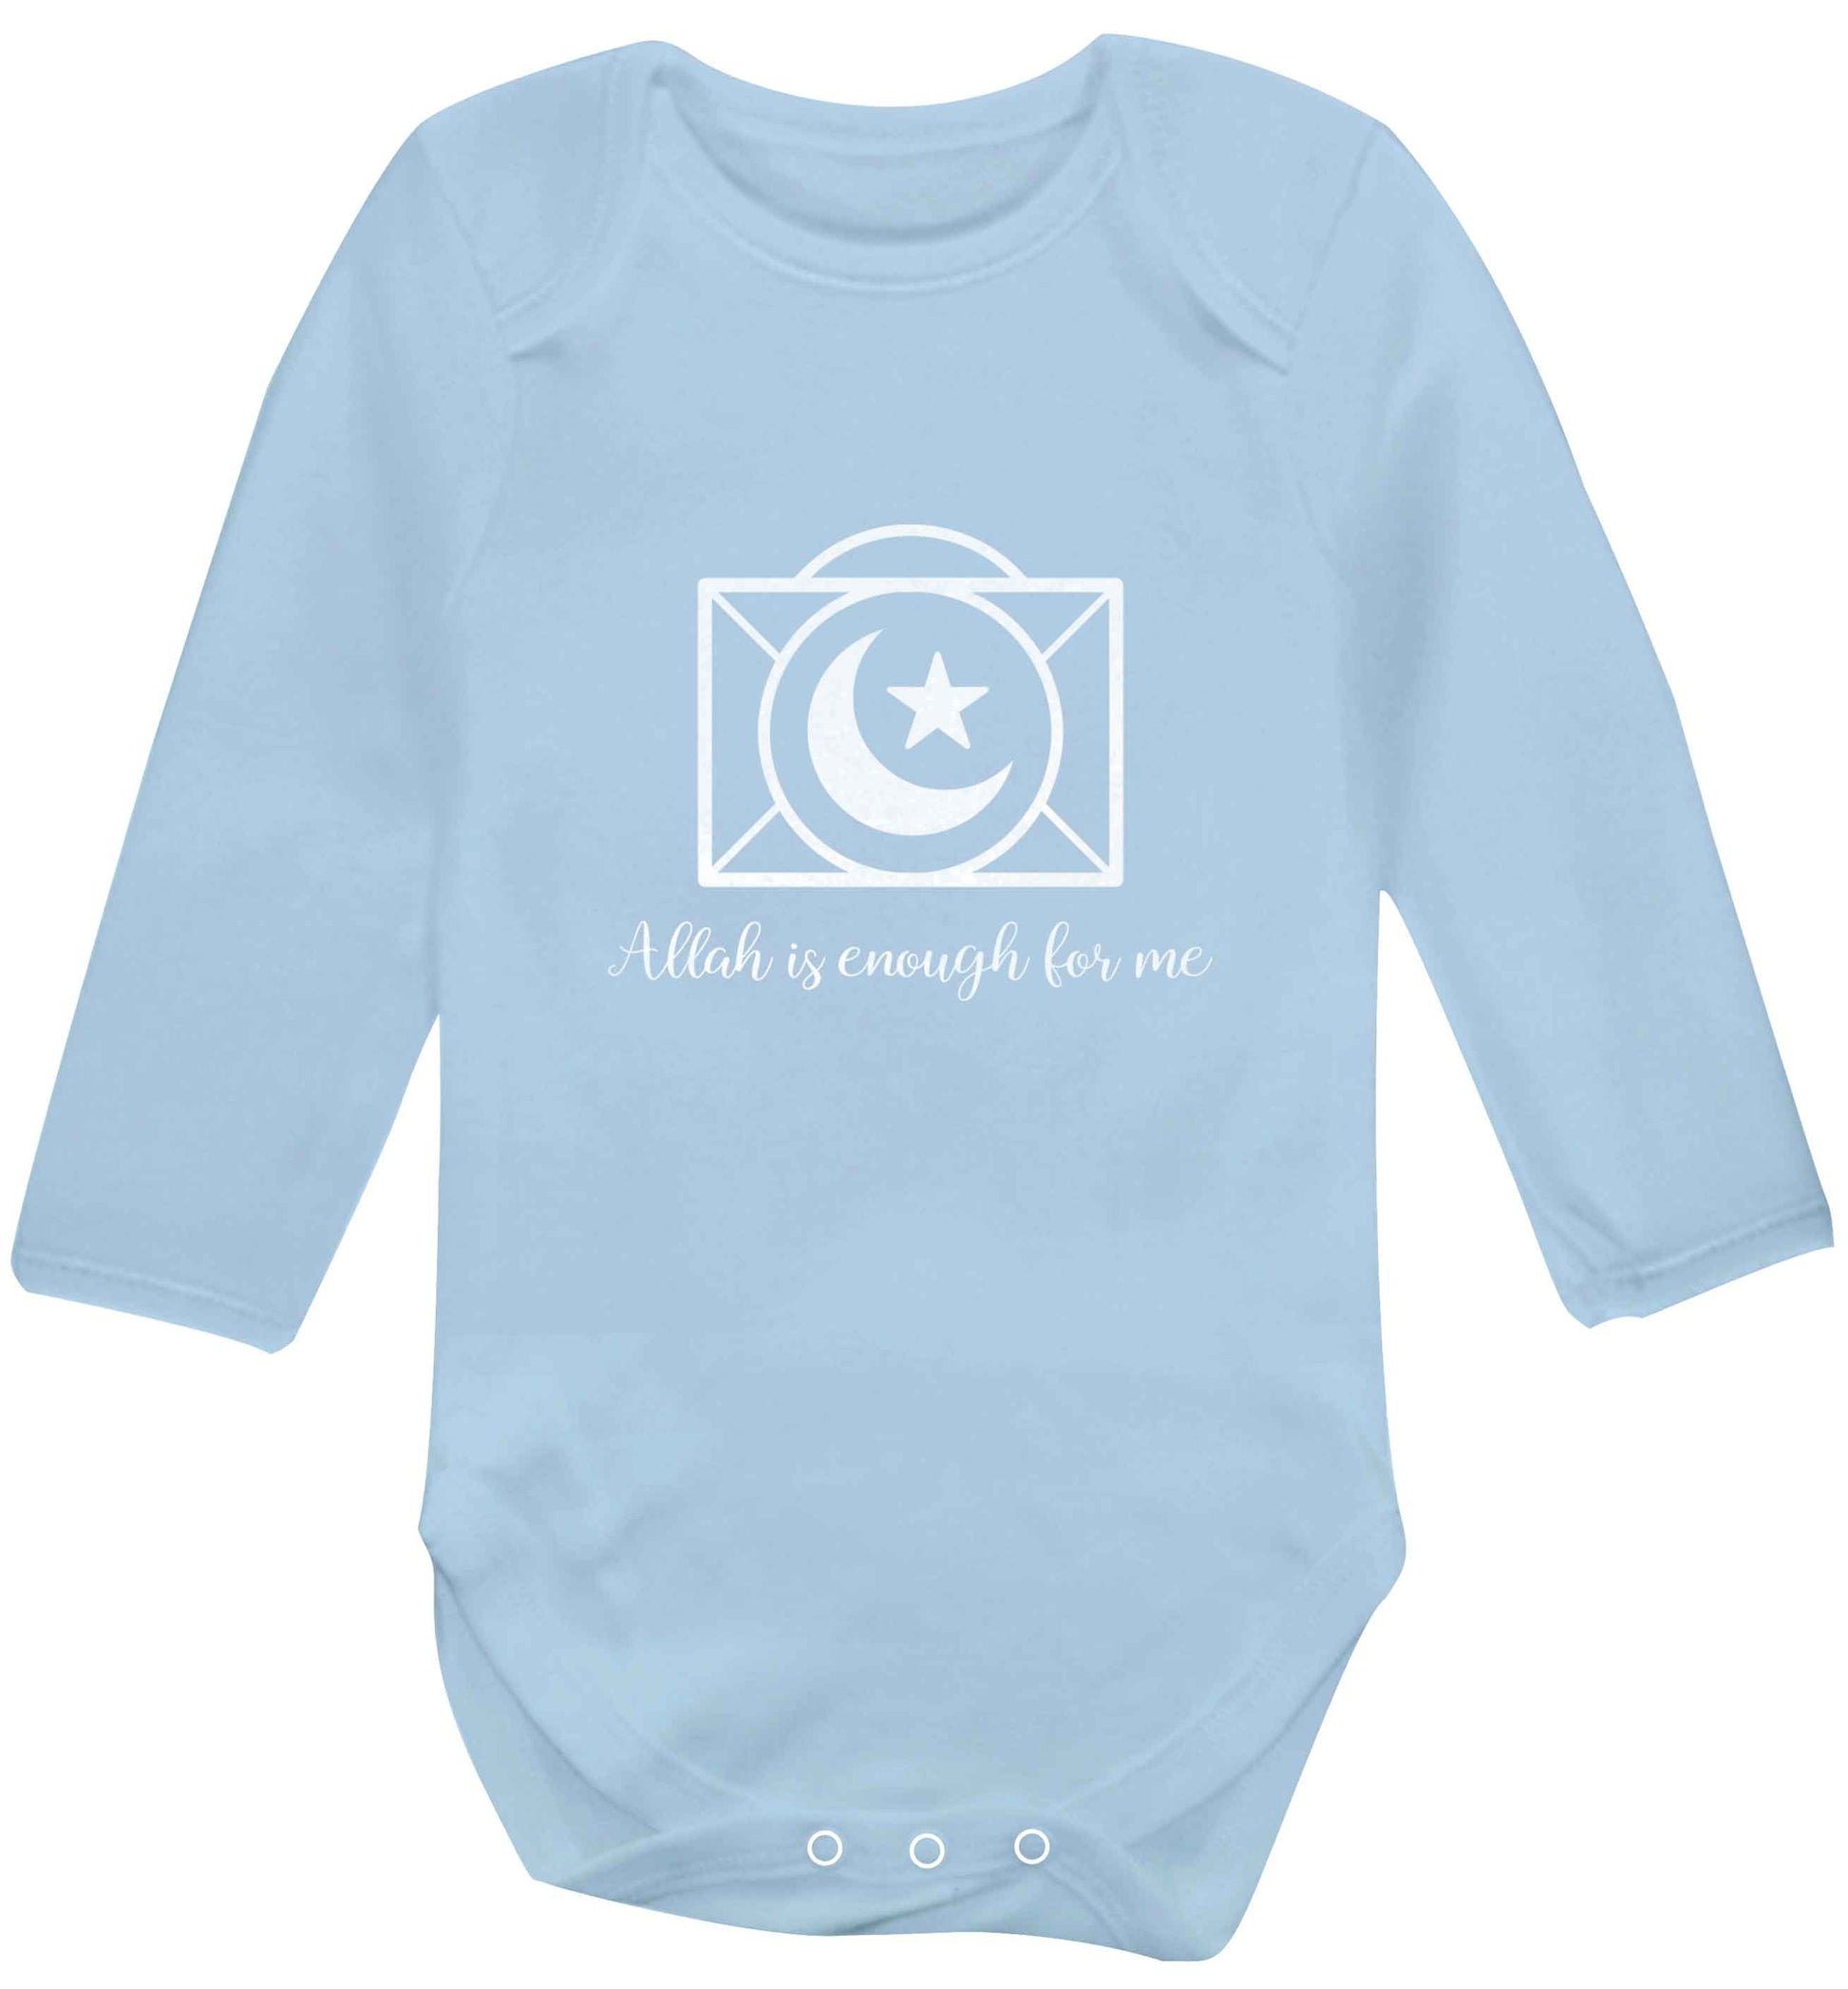 Allah is enough for me baby vest long sleeved pale blue 6-12 months